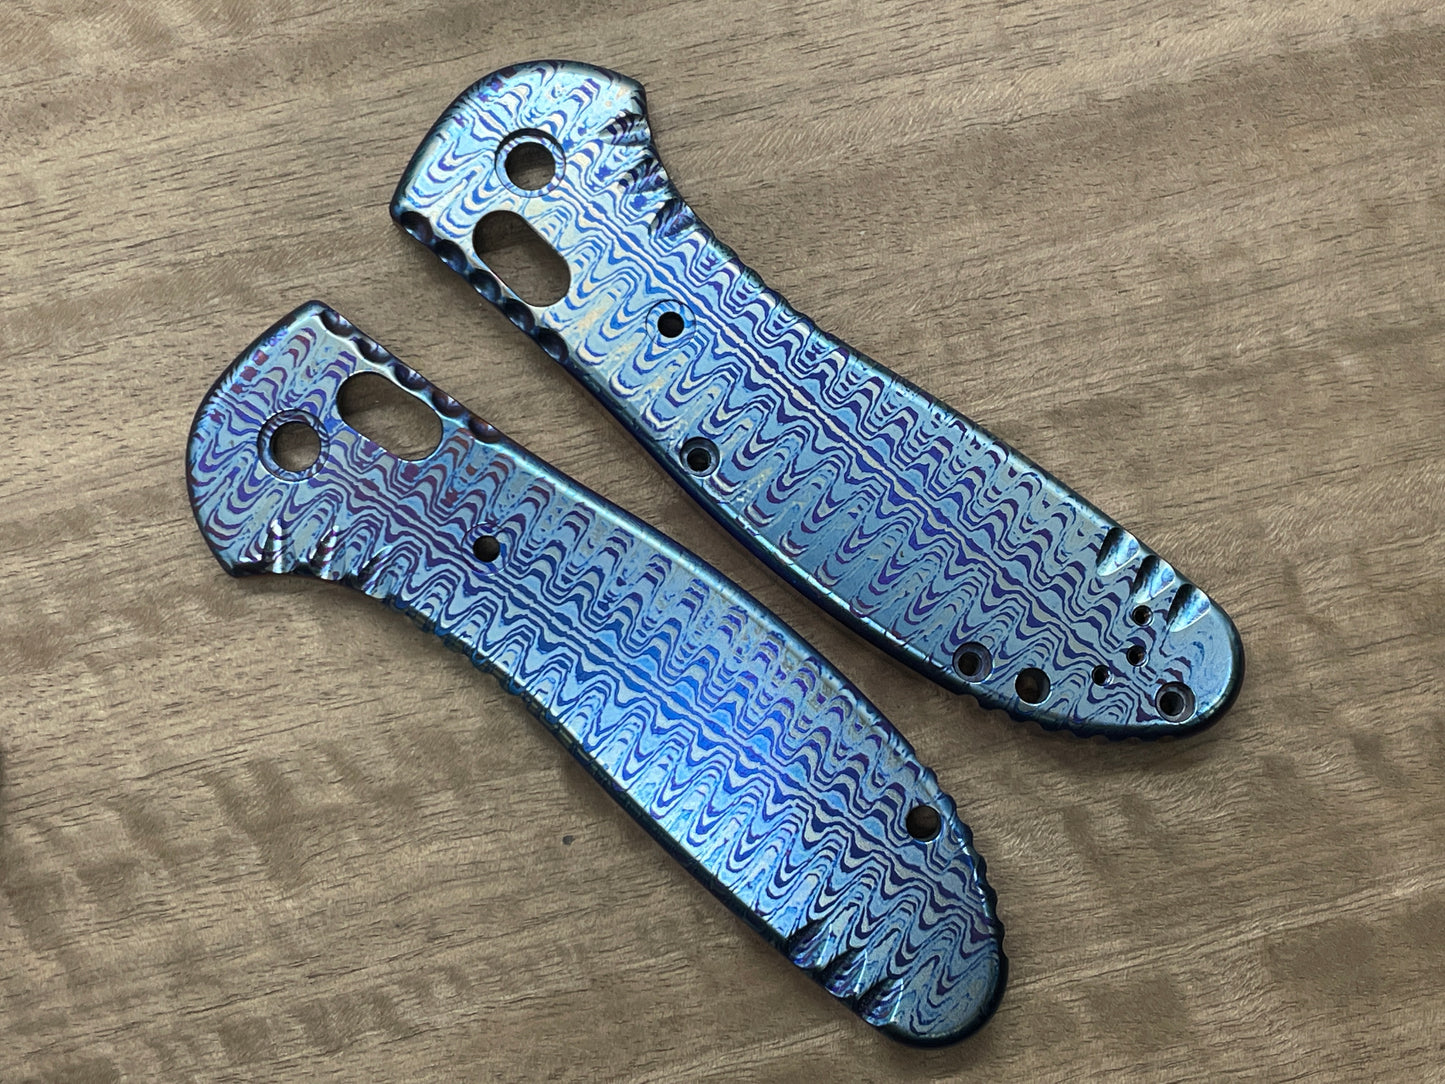 RIPPLE Flamed Titanium Scales for Benchmade GRIPTILIAN 551 & 550